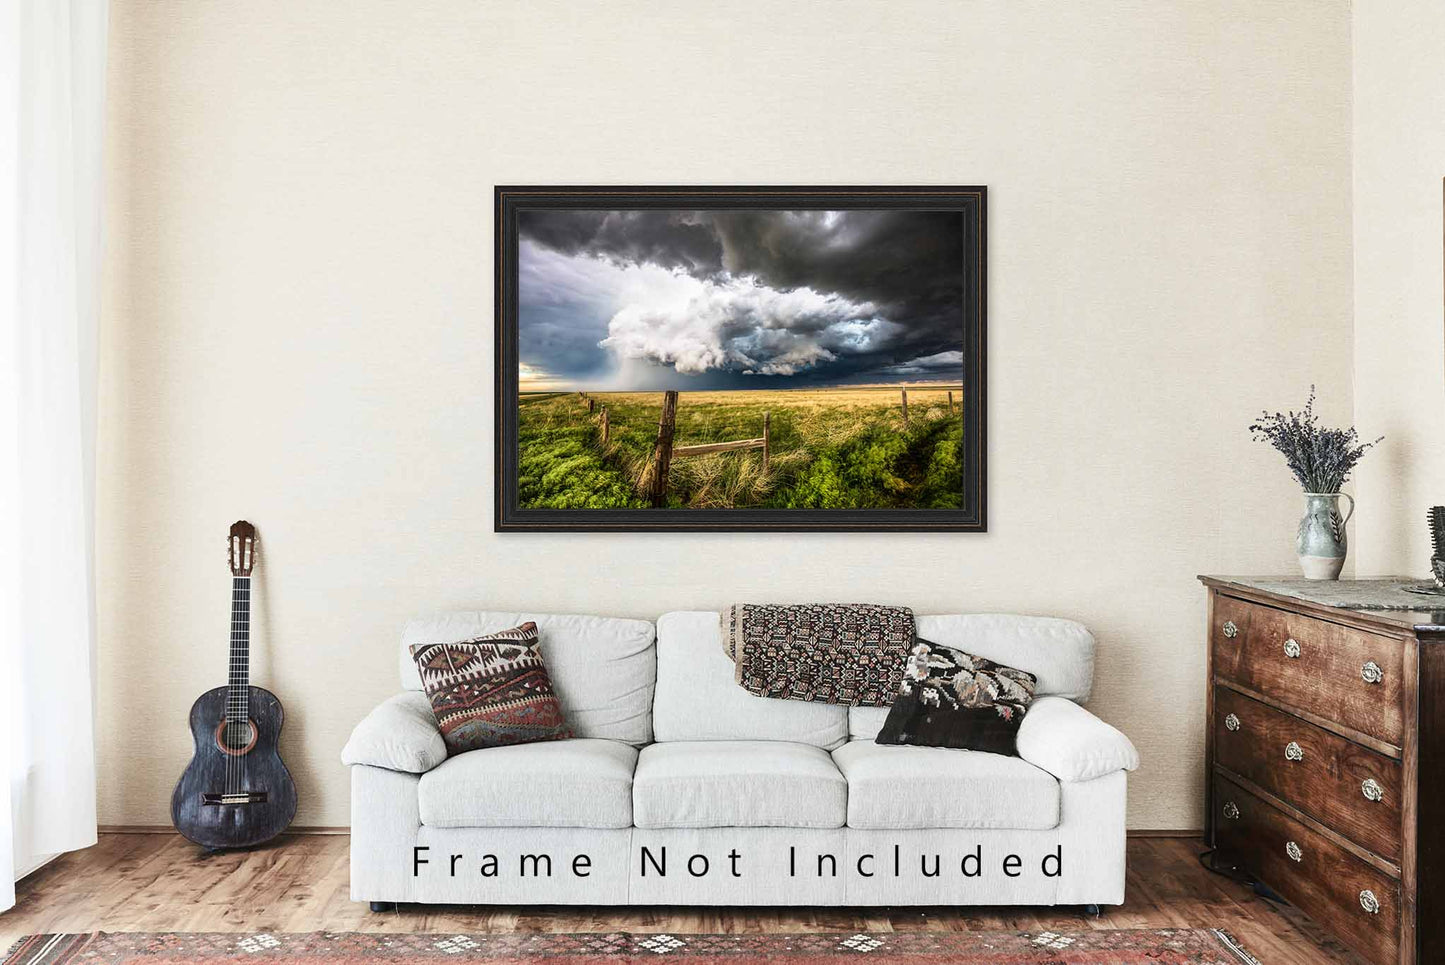 Storm Photography Print (Not Framed) Picture of Supercell Thunderstorm Over Prairie on Stormy Day on Colorado Great Plains Wall Art Nature Decor